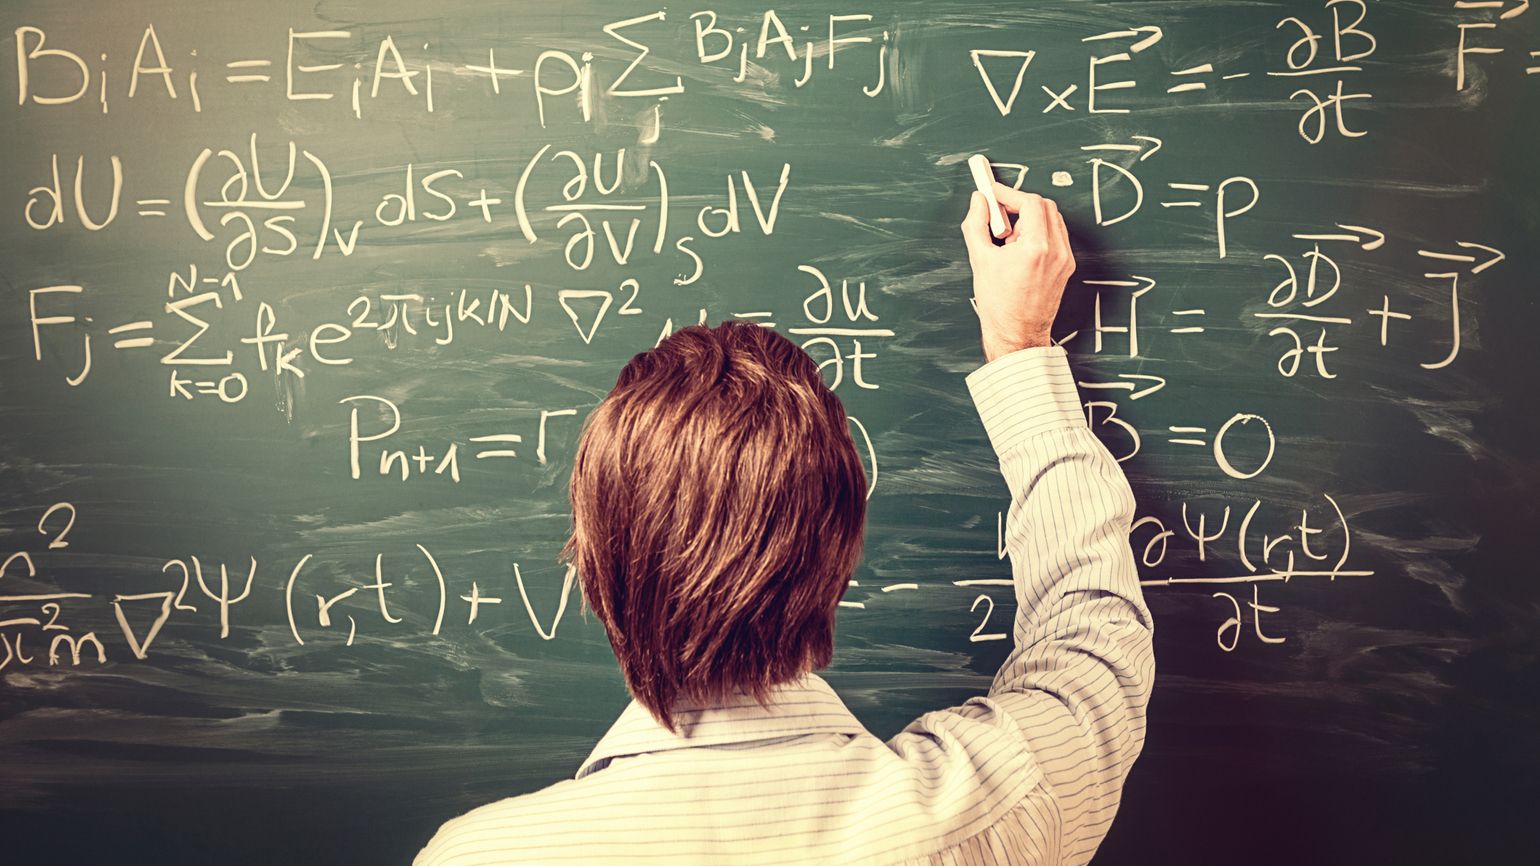 A man solves physics equations on a chalkboard.